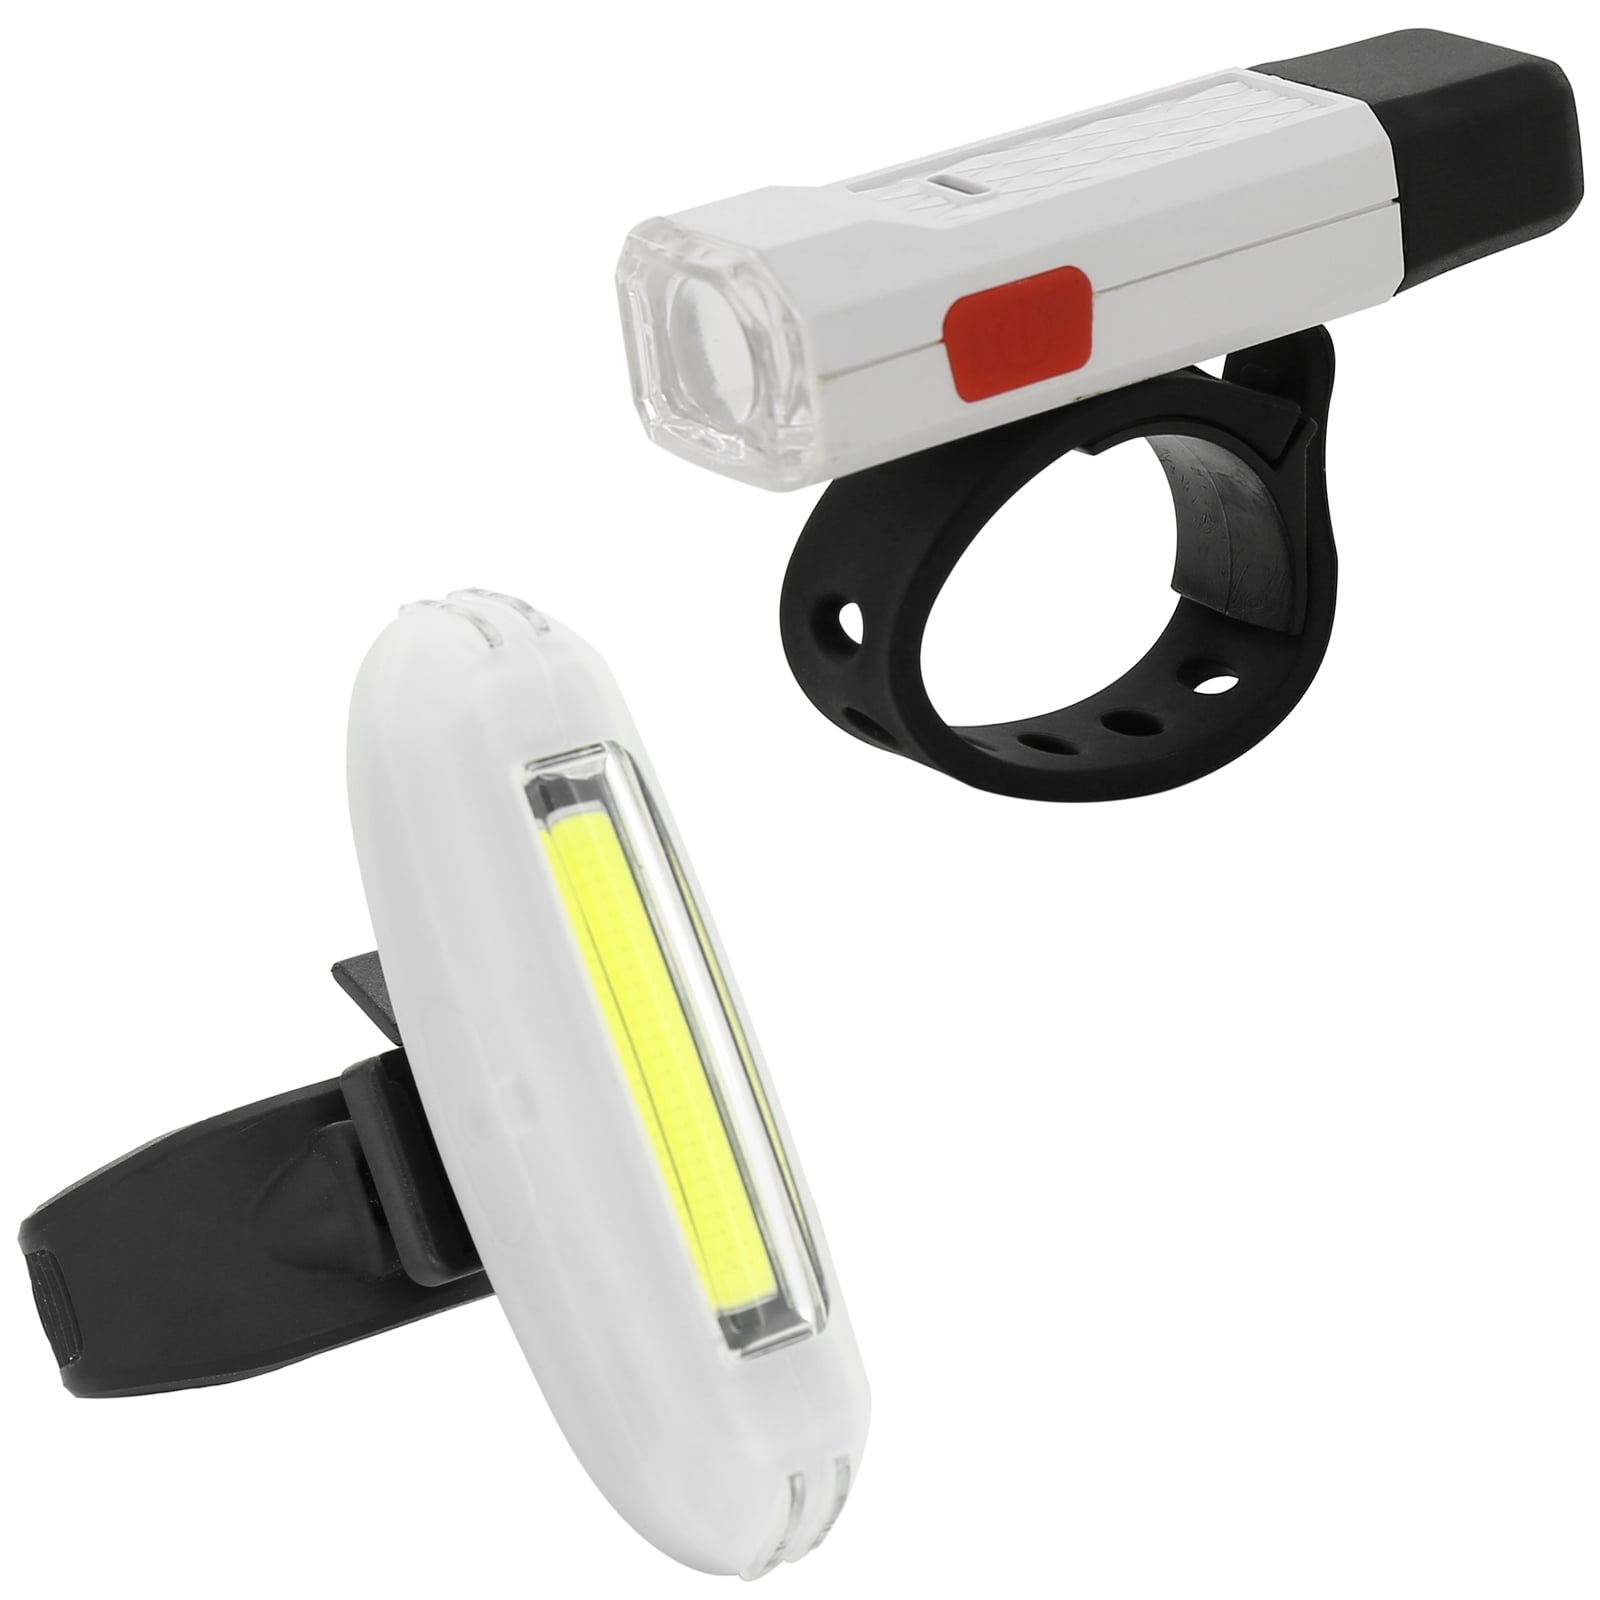 Details about   Adjustable Bicycle Rear Light Tail Light USB Charging Safety Warning Cycling 